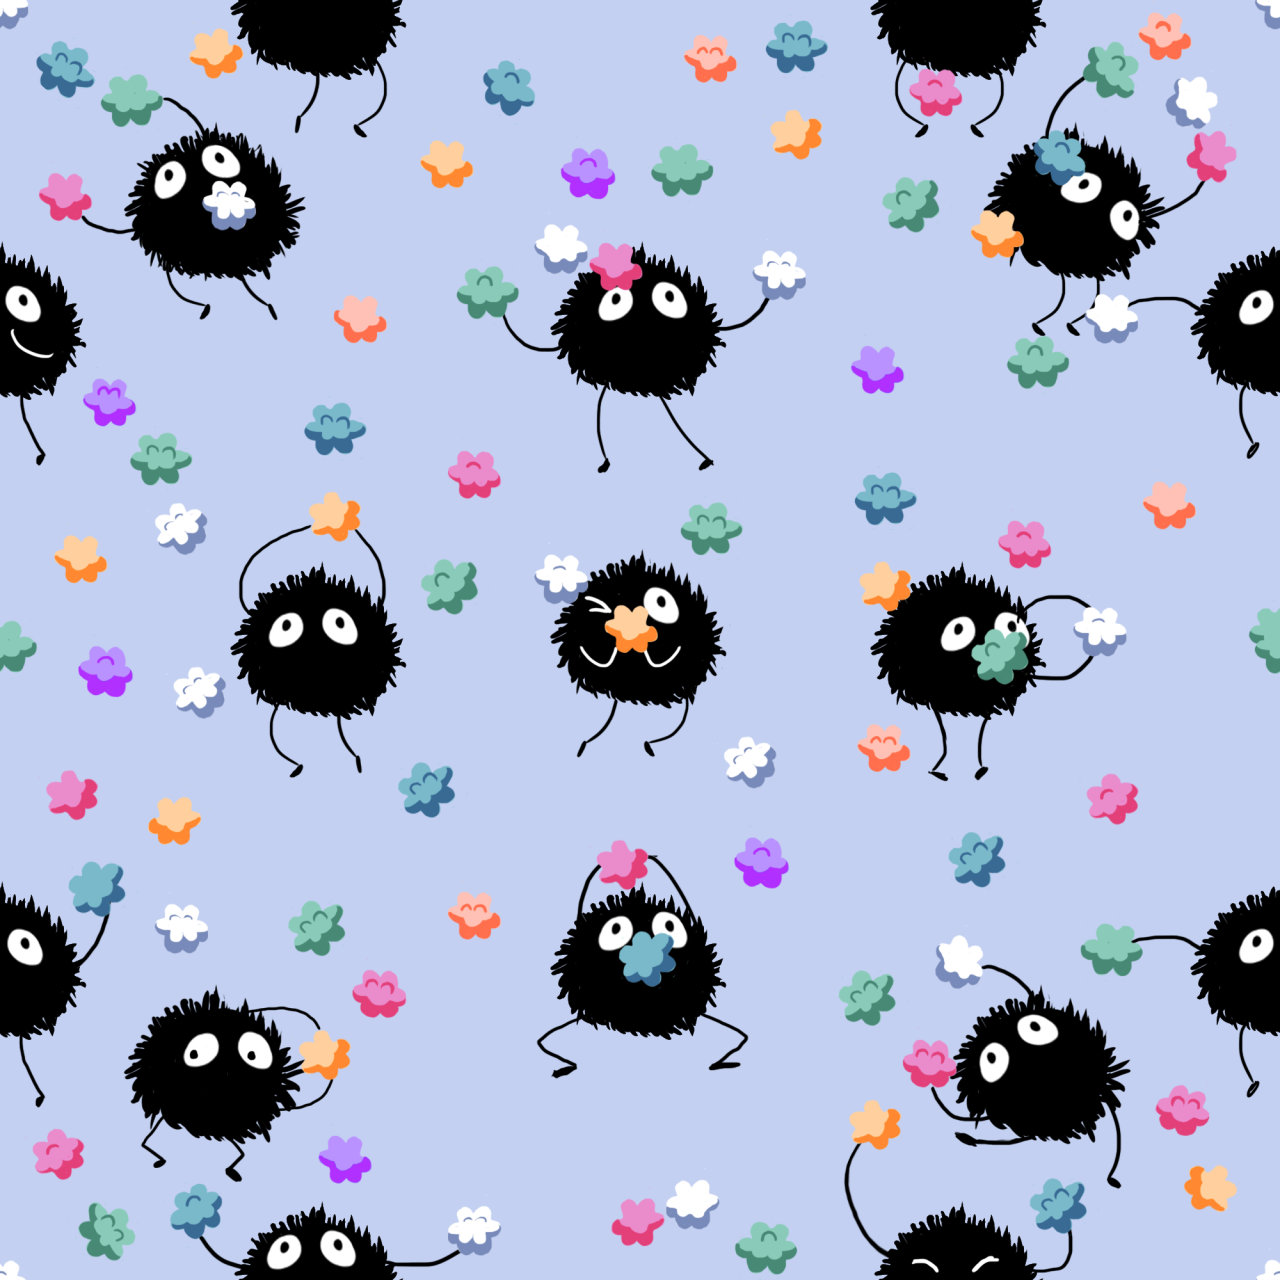 Soot sprite wallpaper  brookedesus Kofi Shop  Kofi  Where creators  get support from fans through donations memberships shop sales and more  The original Buy Me a Coffee Page